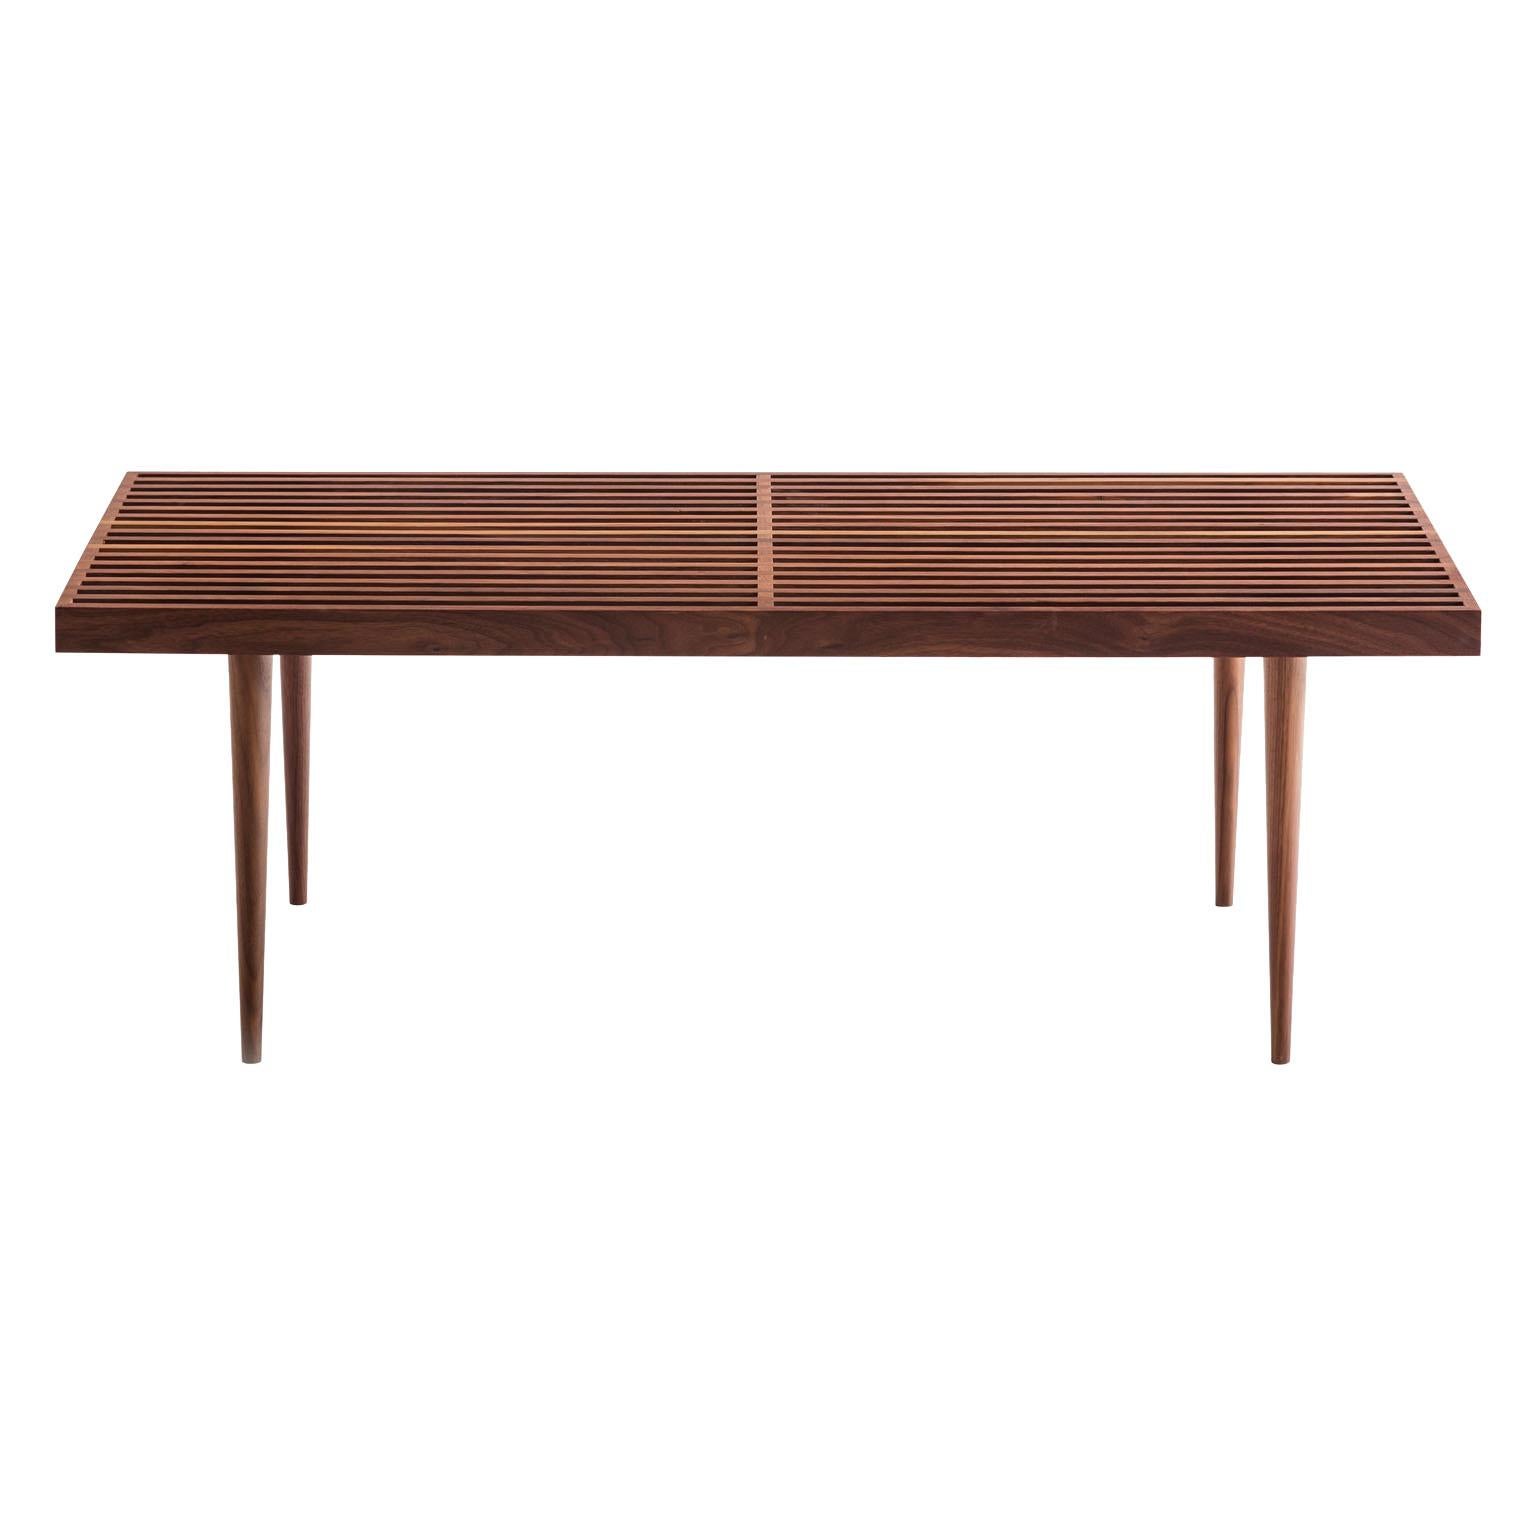 44" Slatted Walnut Bench or Coffee Table by Mel Smilow For Sale